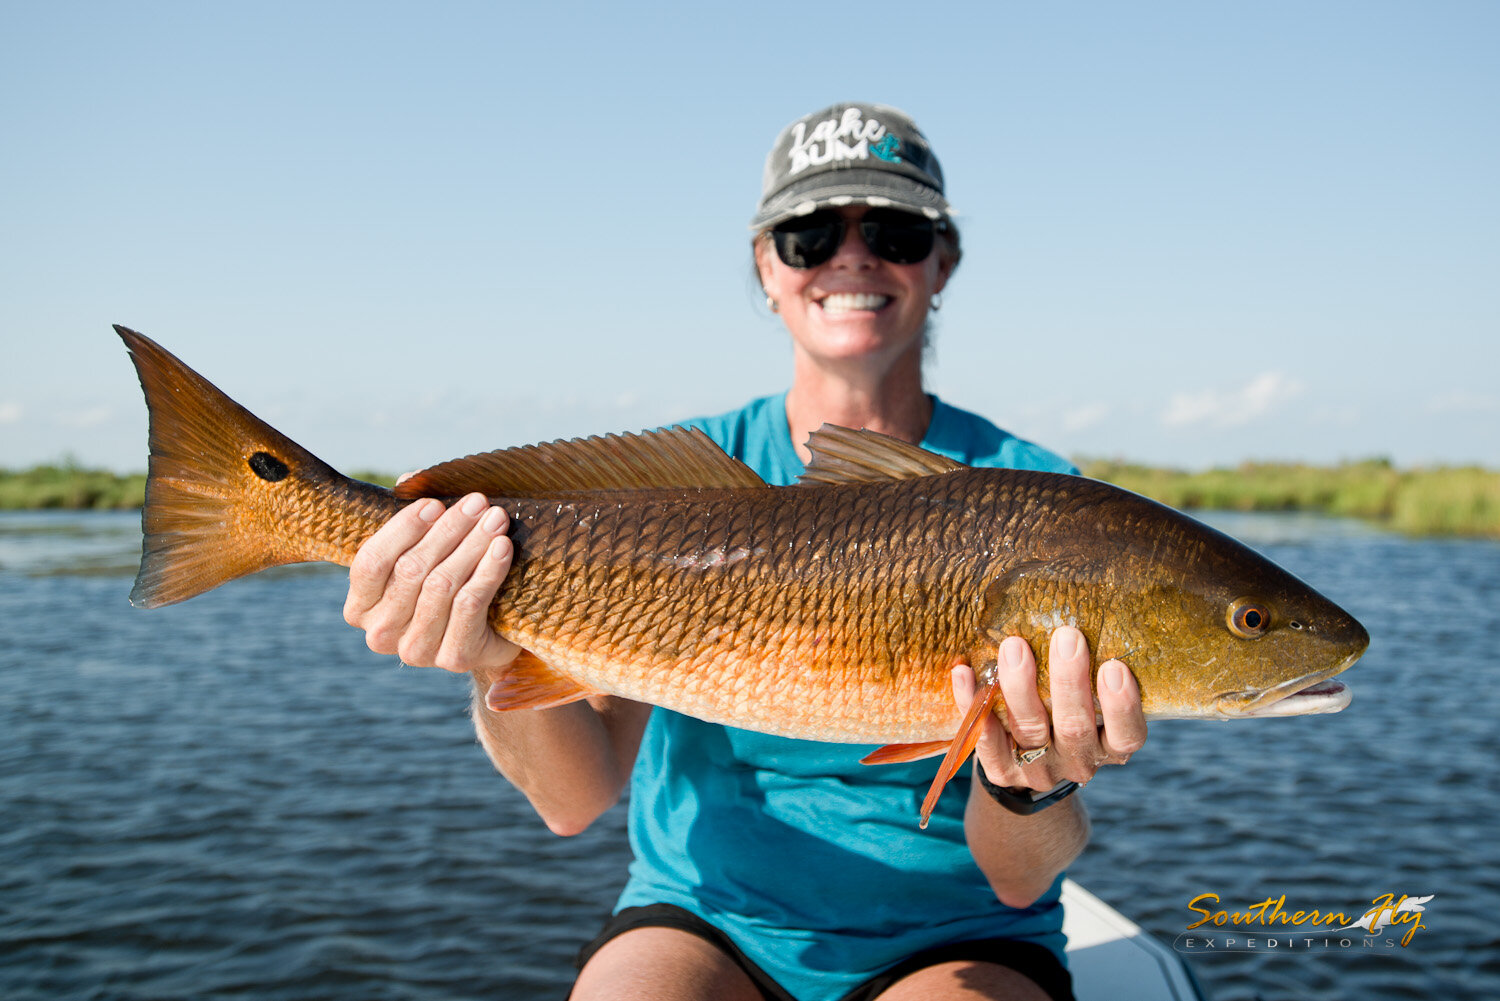 2019-09-12_SouthernFlyExpeditions_NewOrleans_AmyClaphanAndToddClaphan-1.jpg